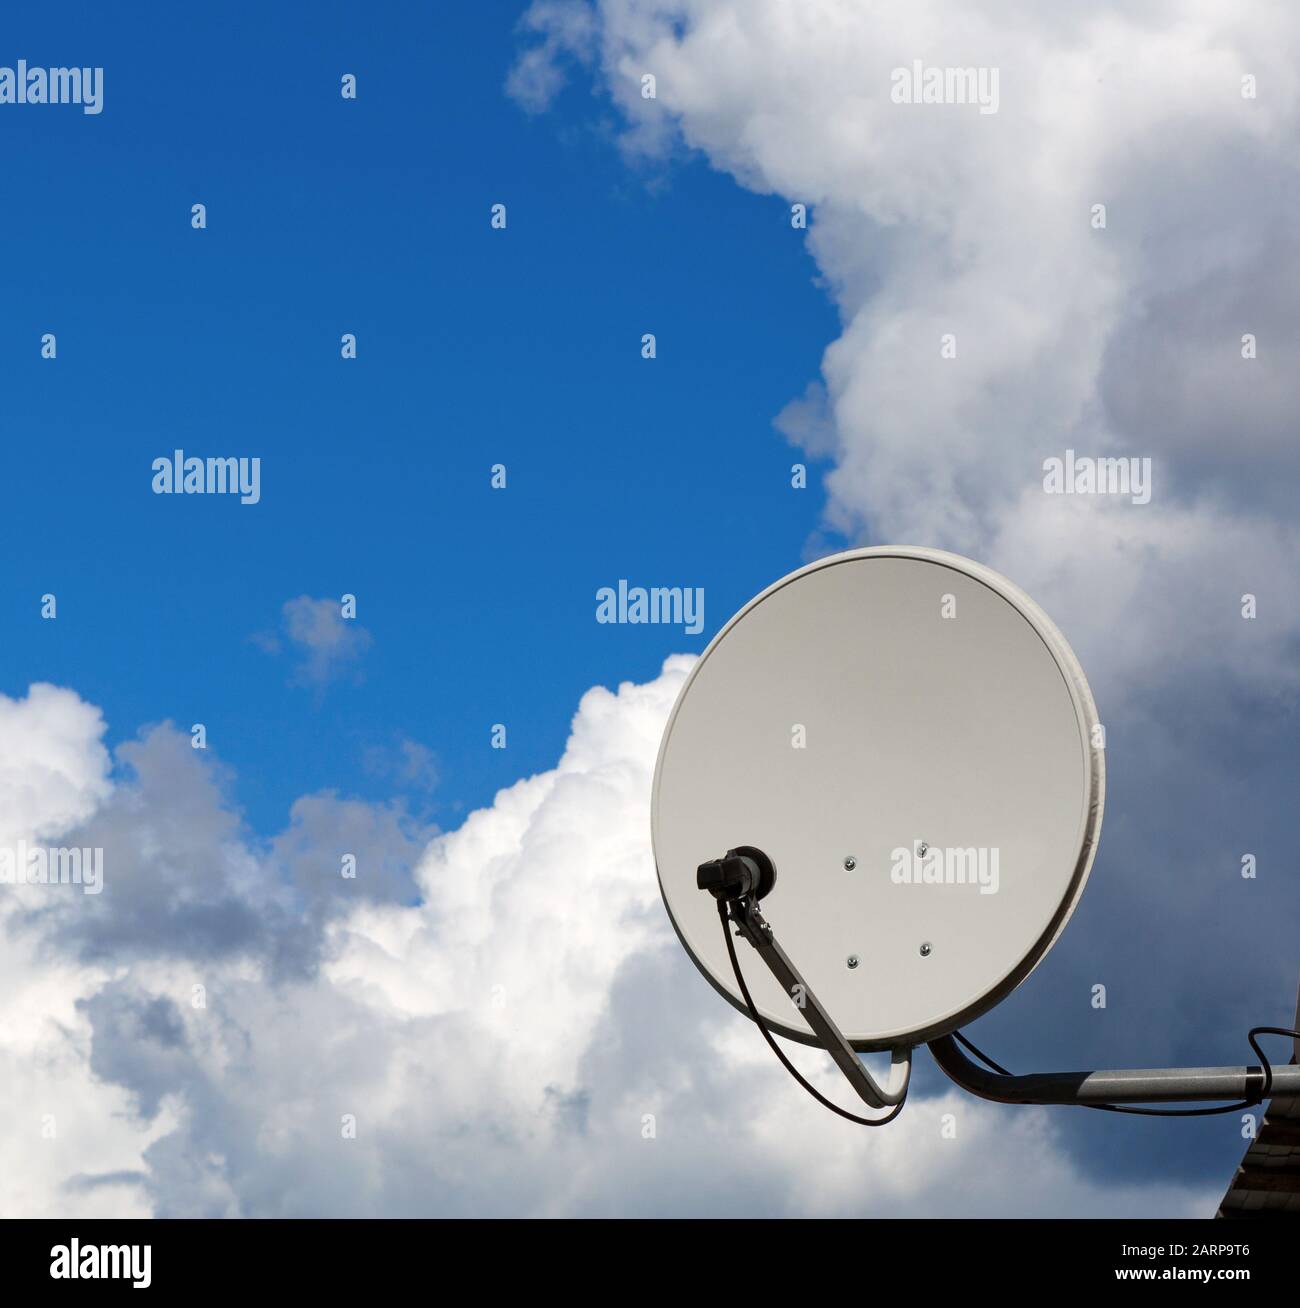 Satellite dish antenna with blue sky with clouds. Stock Photo